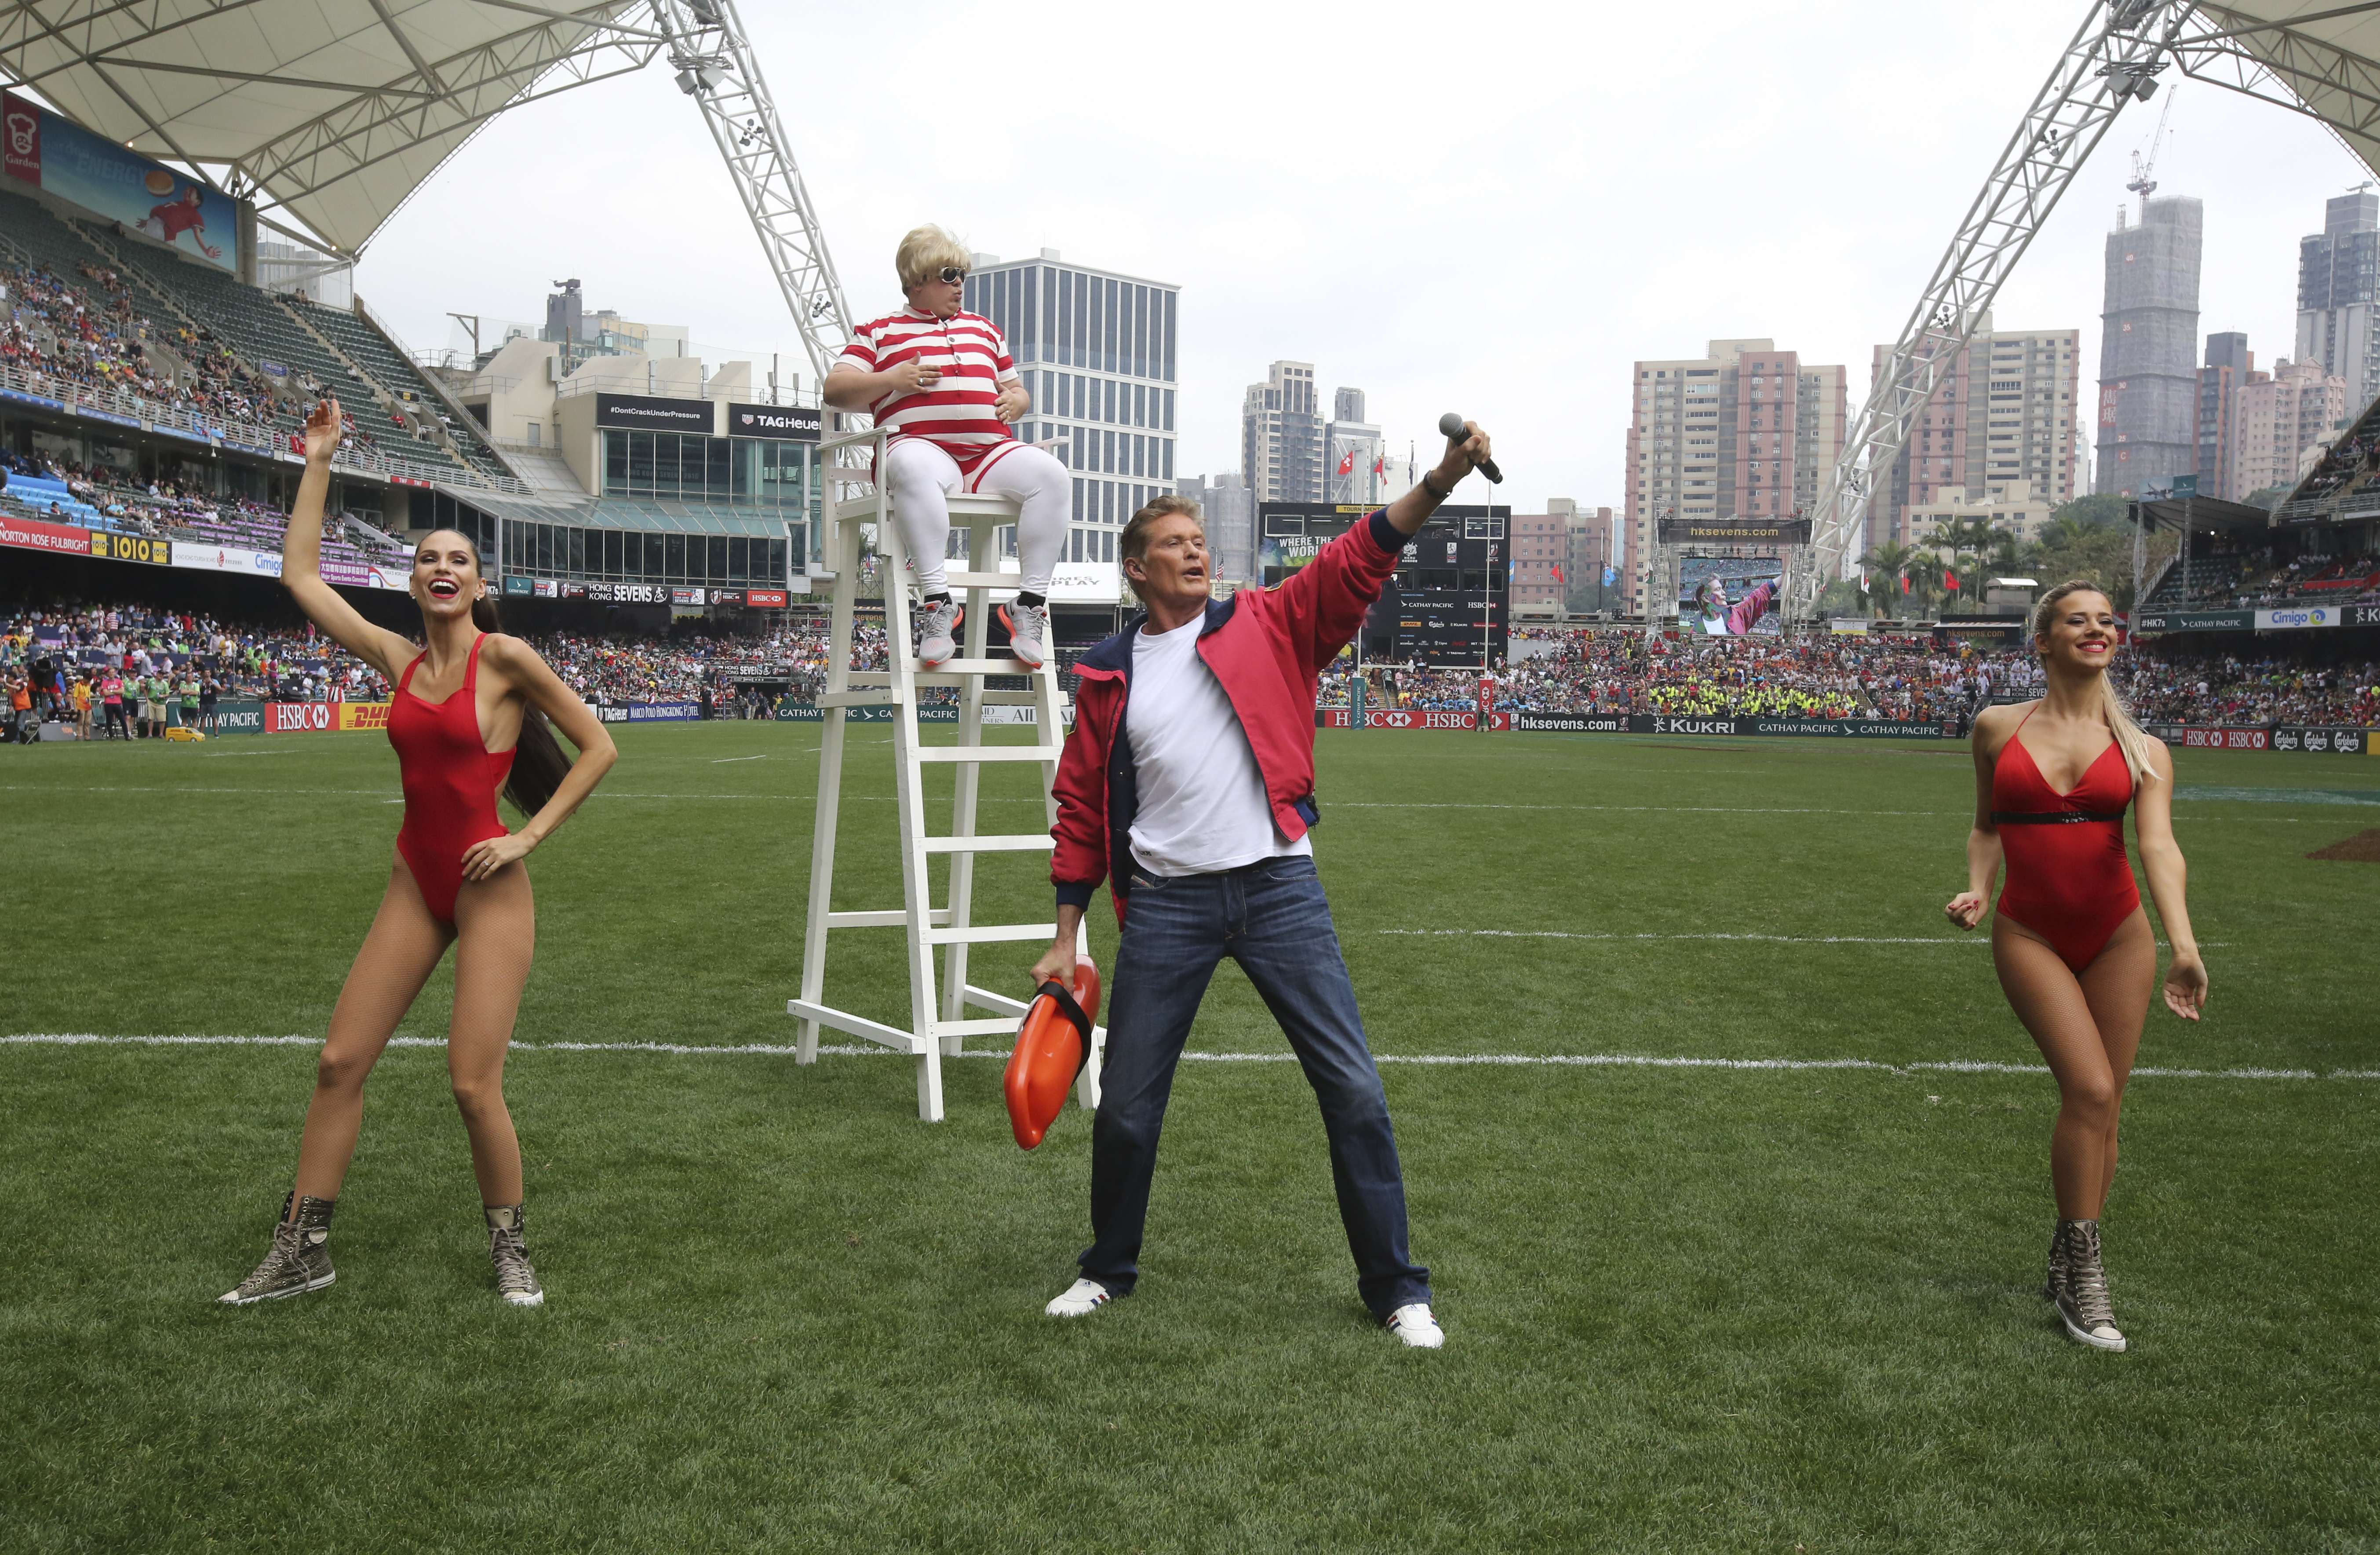 Former Baywatch star David Hasselhoff entertains the crowd on the second day of this year’s Hong Kong Sevens. Photo: Edward Wong